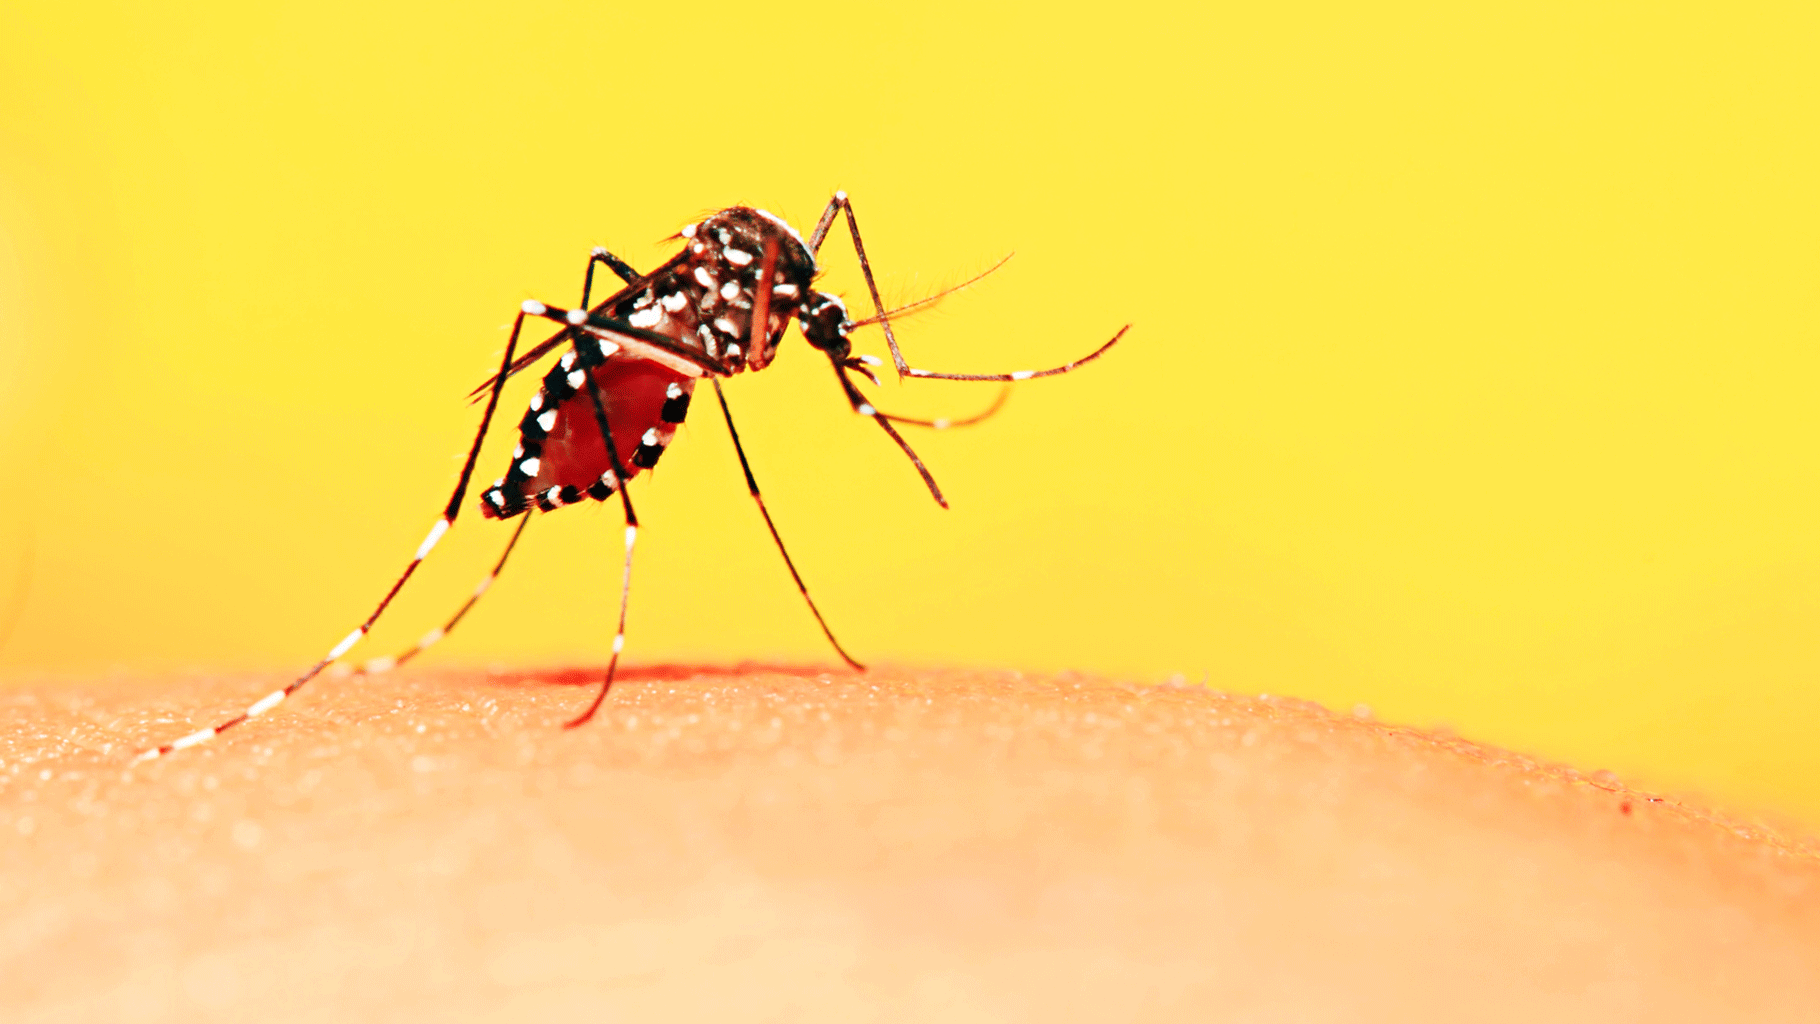 Even as India attempts to eradicate malaria by 2030, researchers have reported malarial parasites resistant to drugs. 